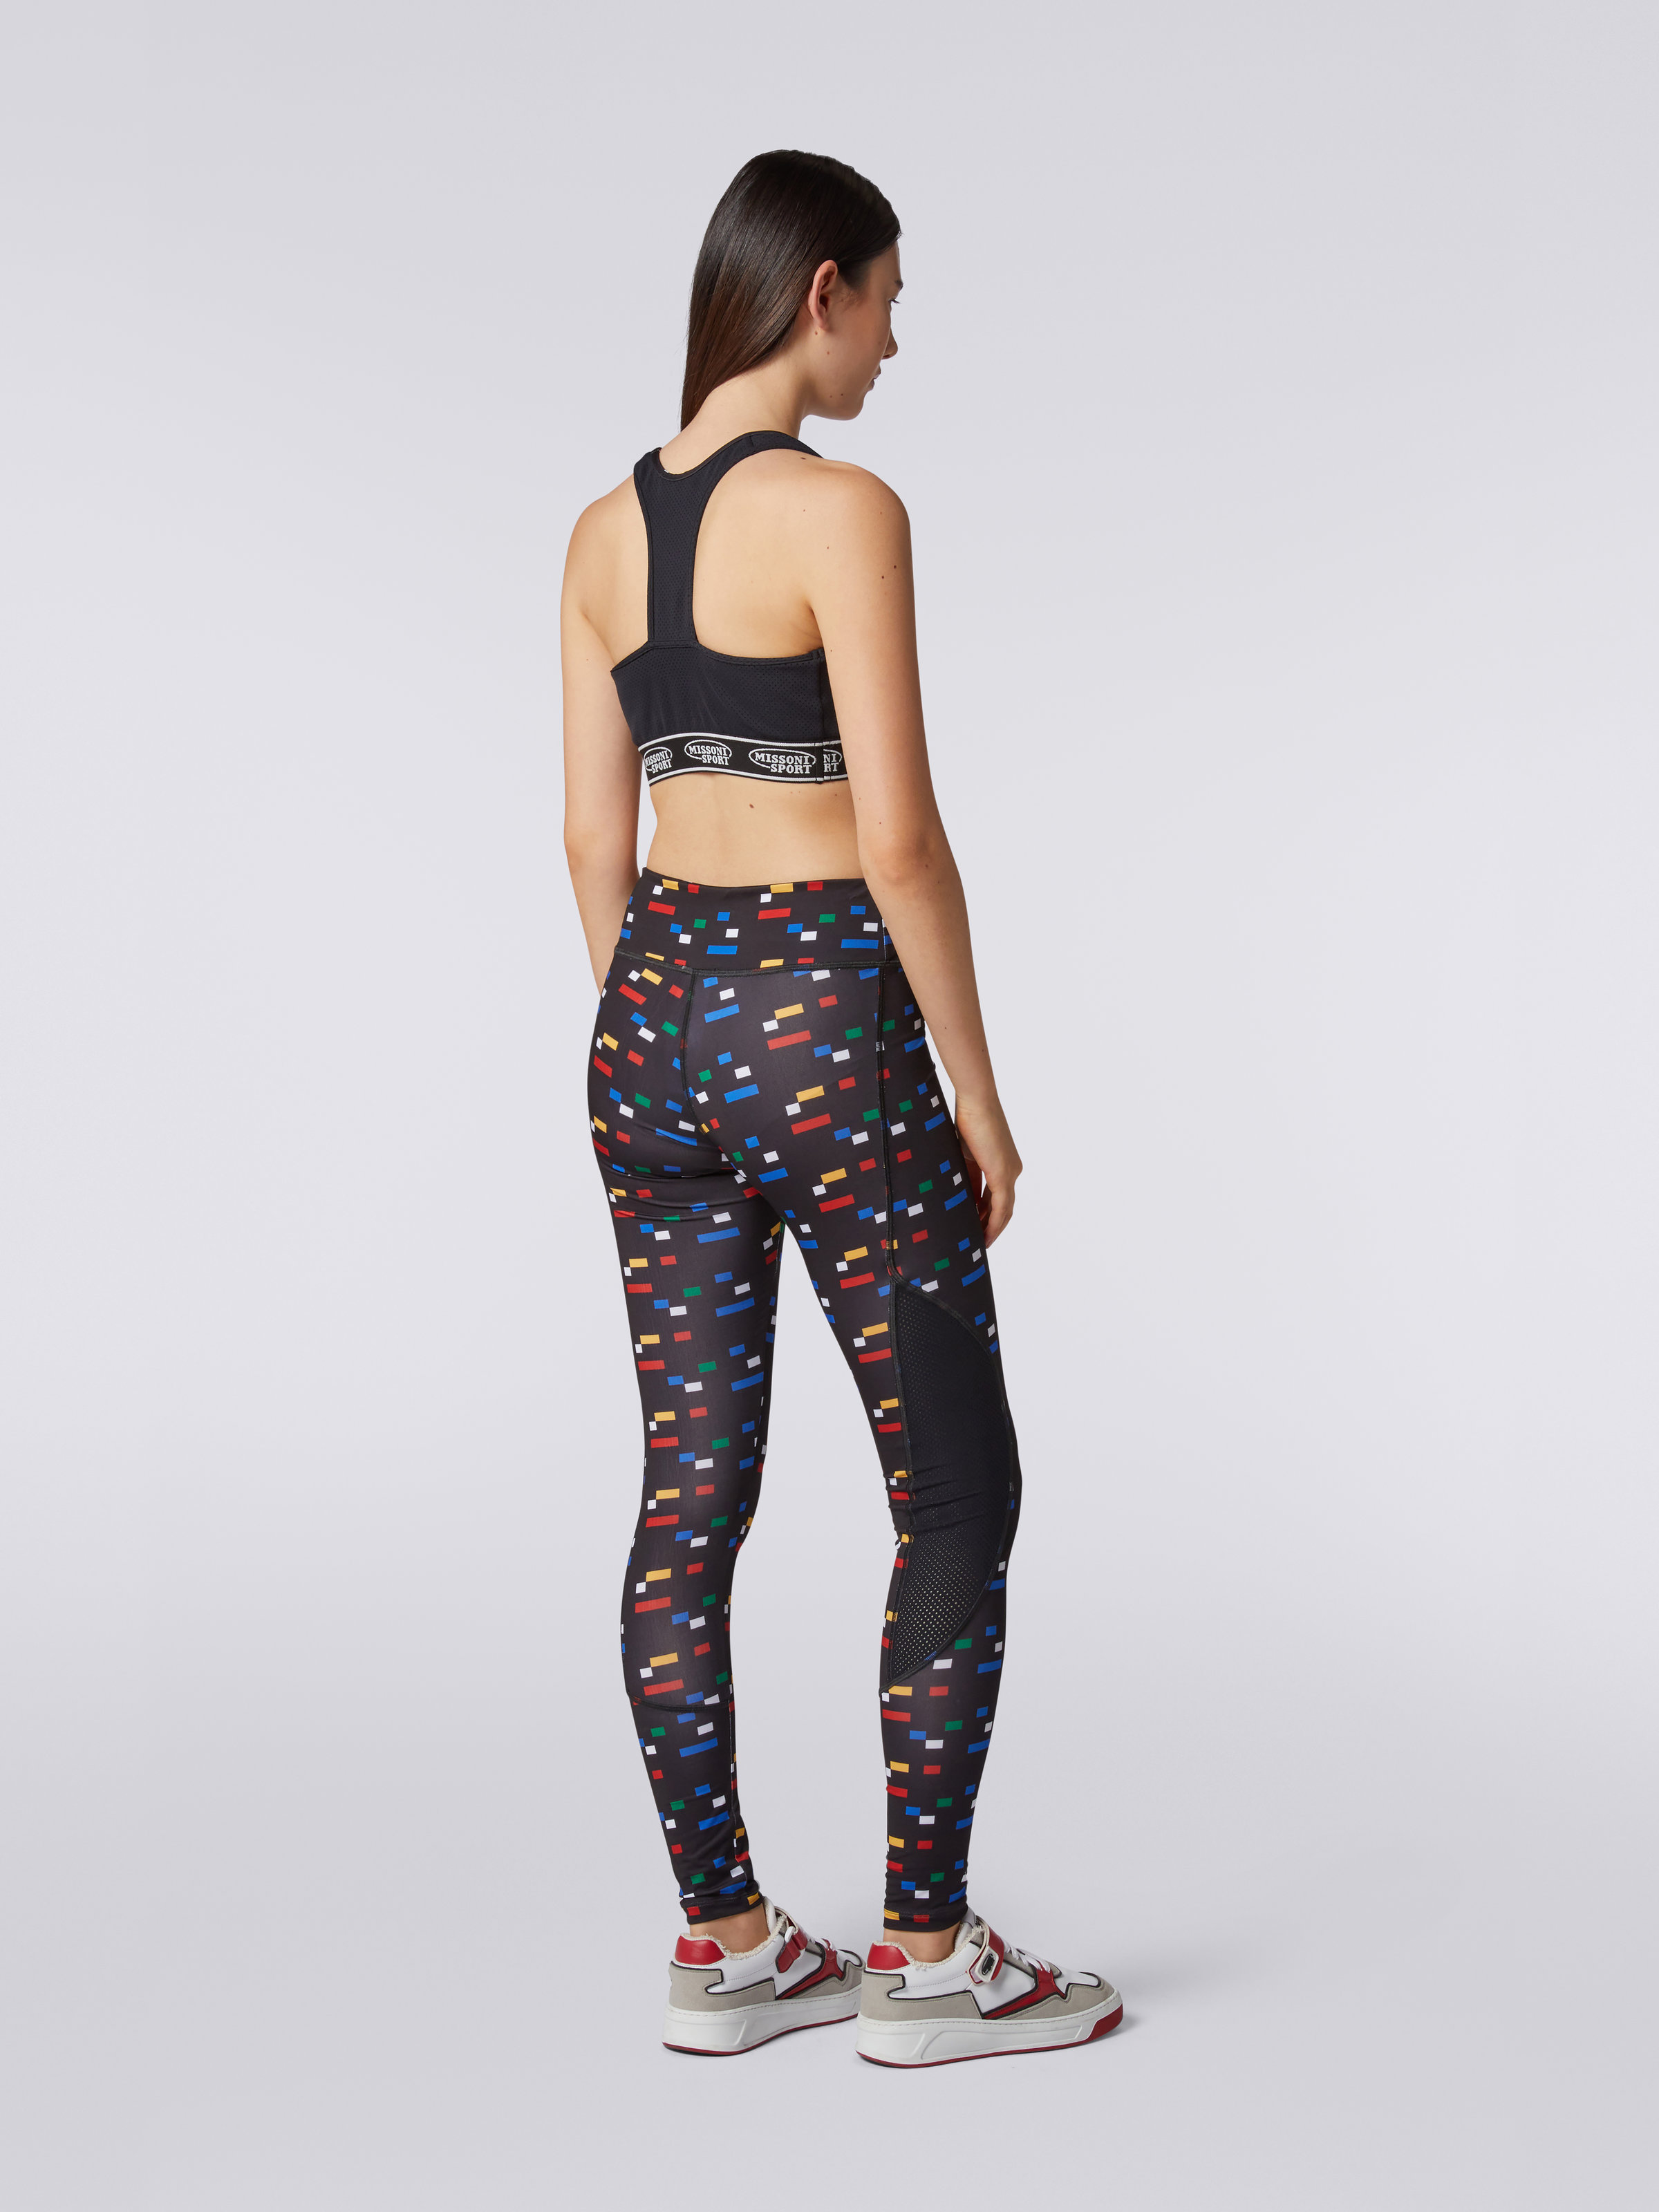 Leggings with mesh inserts and Legacy logo pixels, Black & Multicoloured  - 3